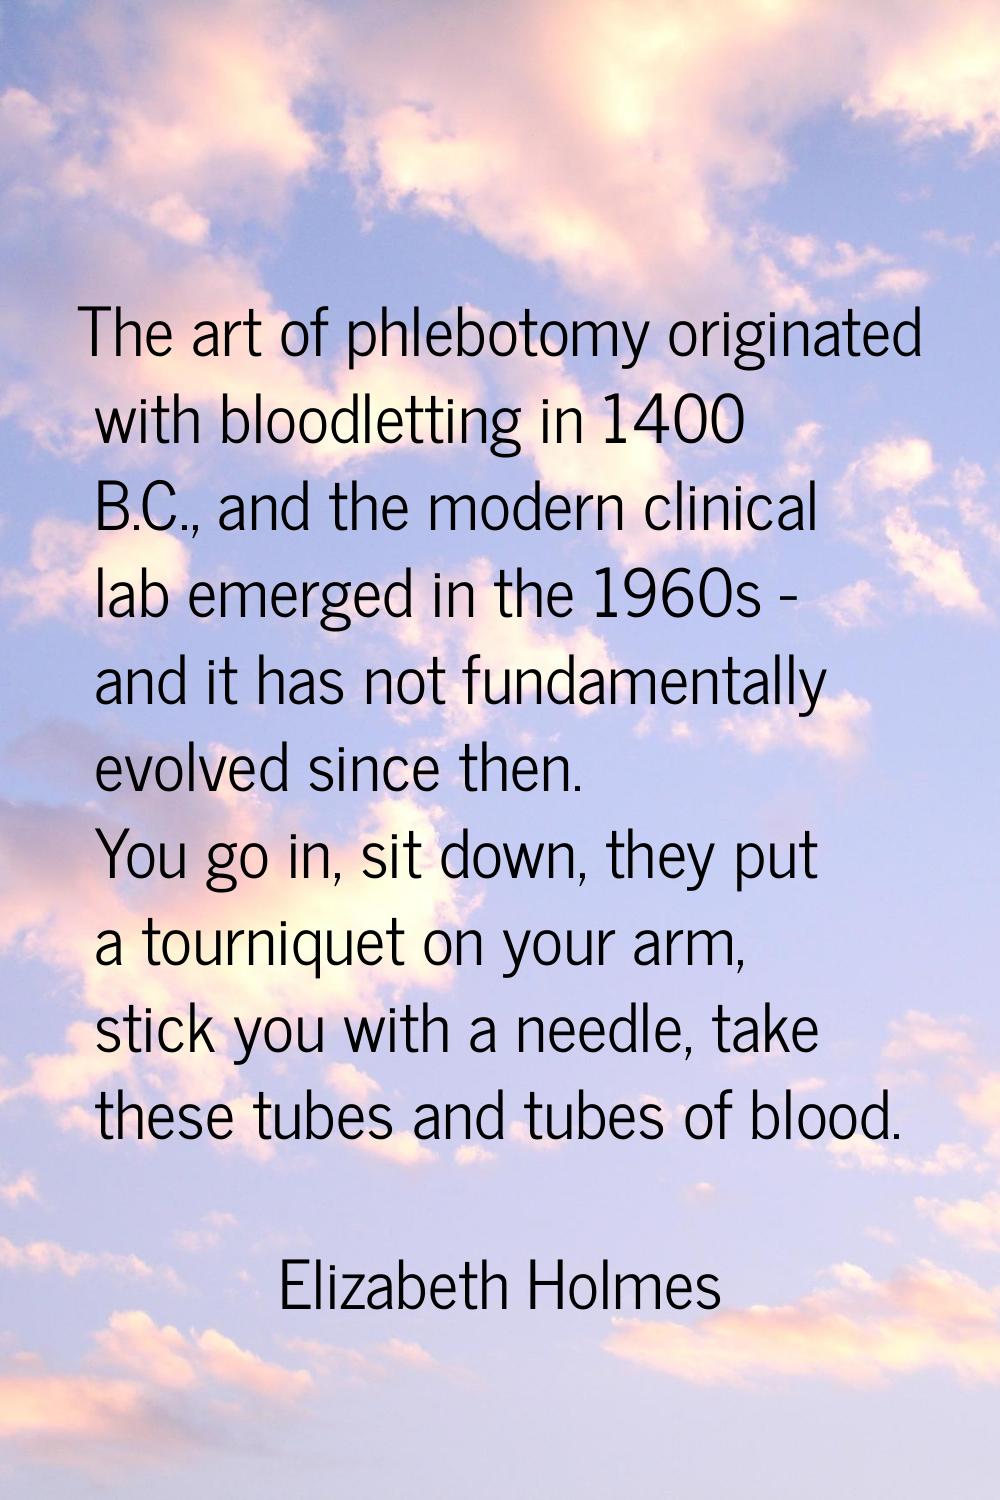 The art of phlebotomy originated with bloodletting in 1400 B.C., and the modern clinical lab emerge